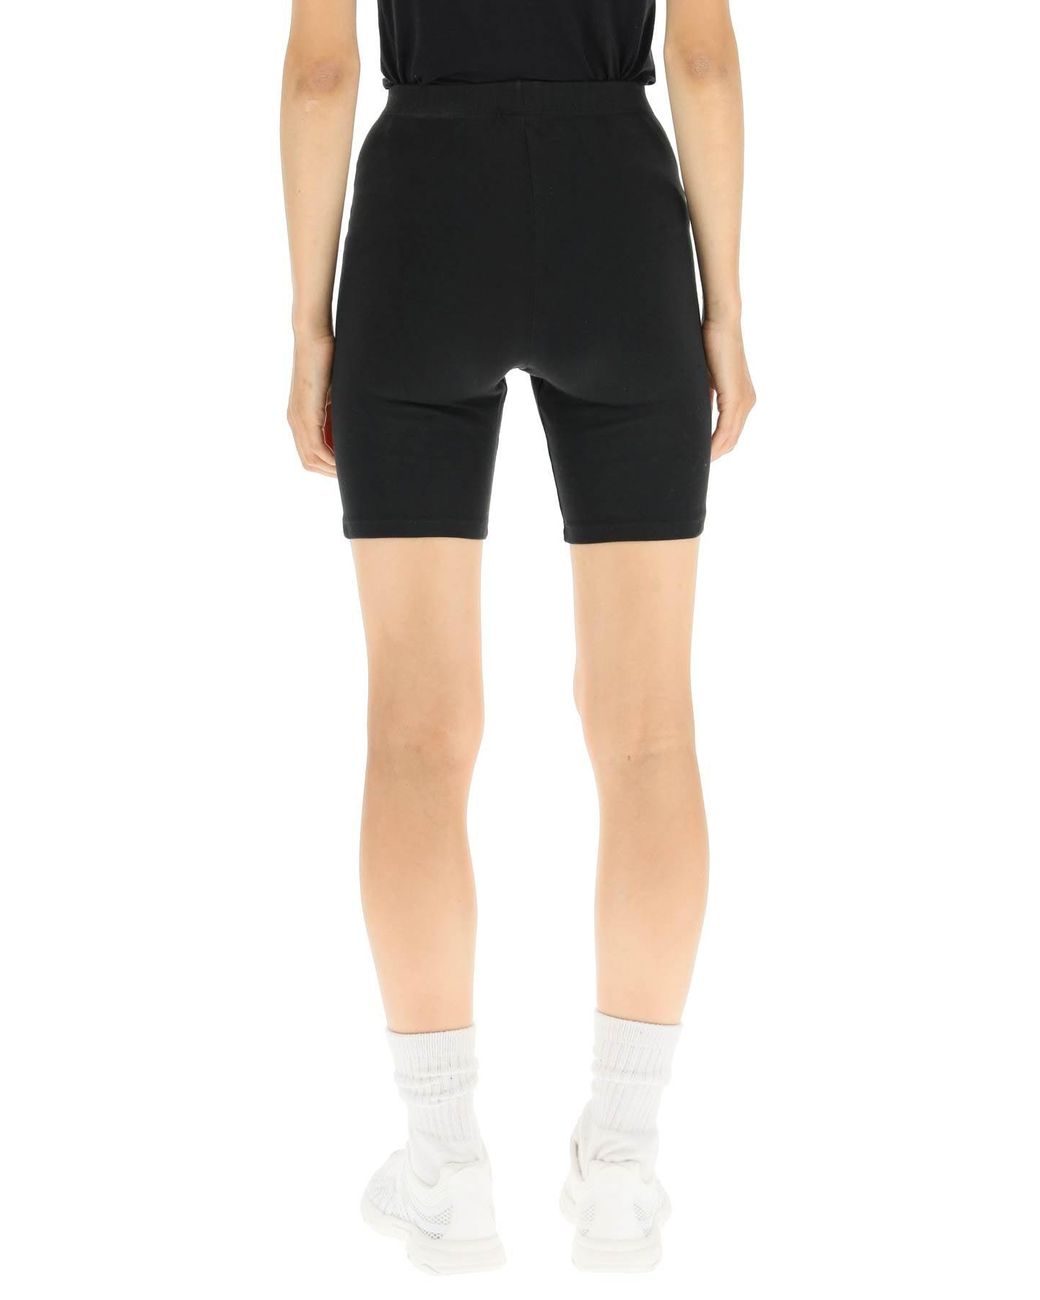 Sporty & Rich Cotton Sporty Rich disco Cycling Shorts in Faded Black Womens Shorts Sporty & Rich Shorts - Save 29% Black 